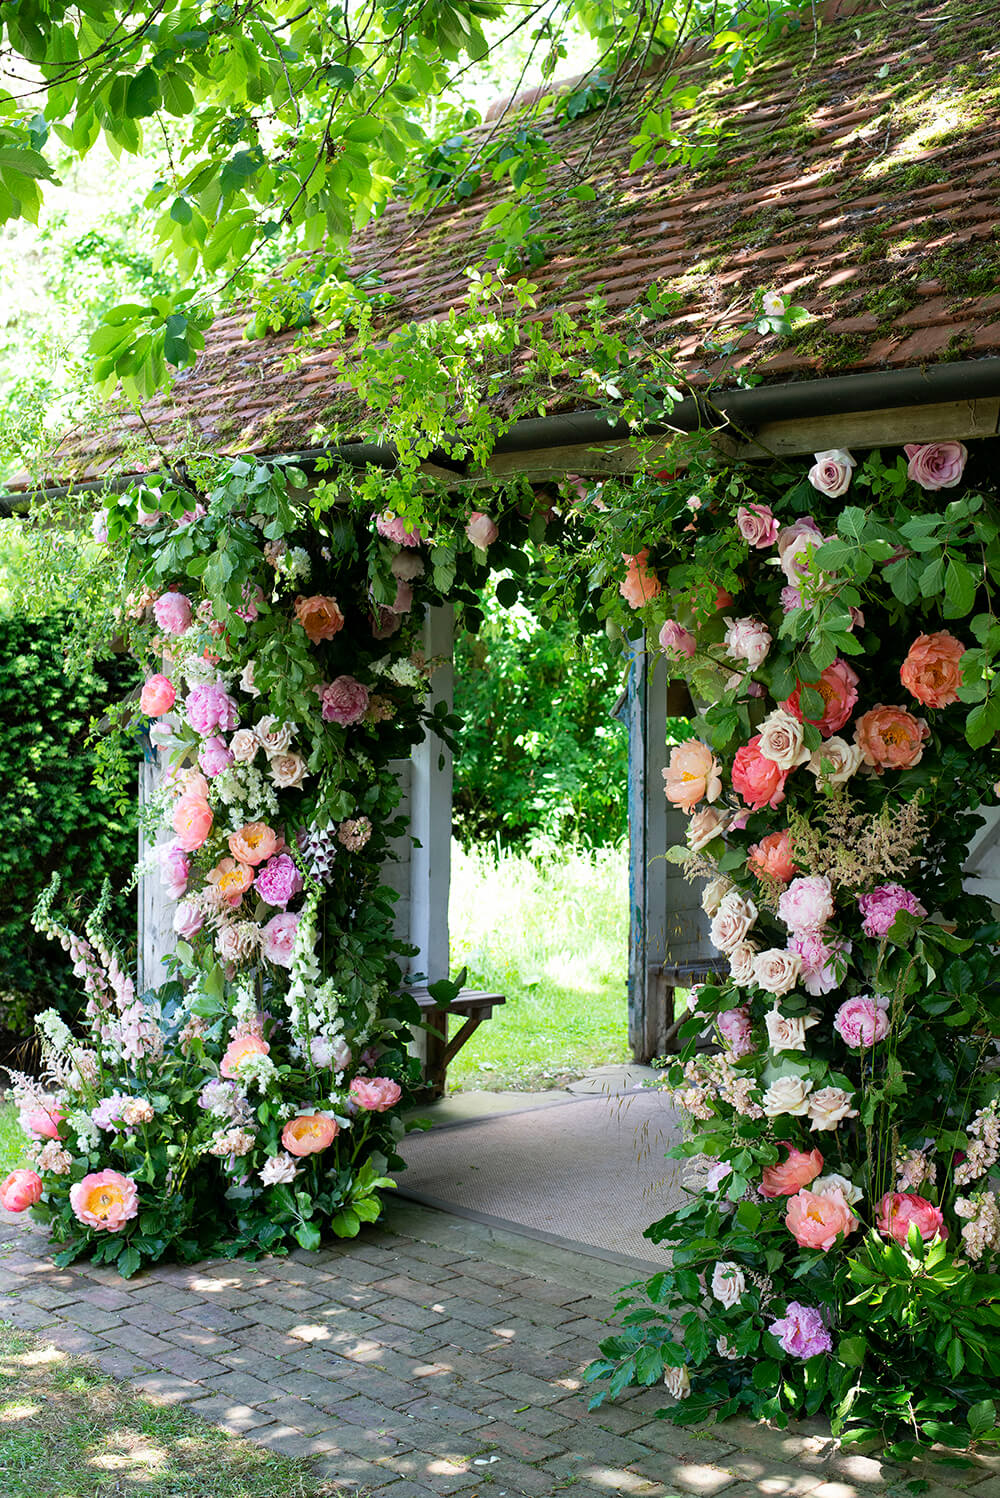 Wooden shelter with roses foxgloves and dahlia doorway